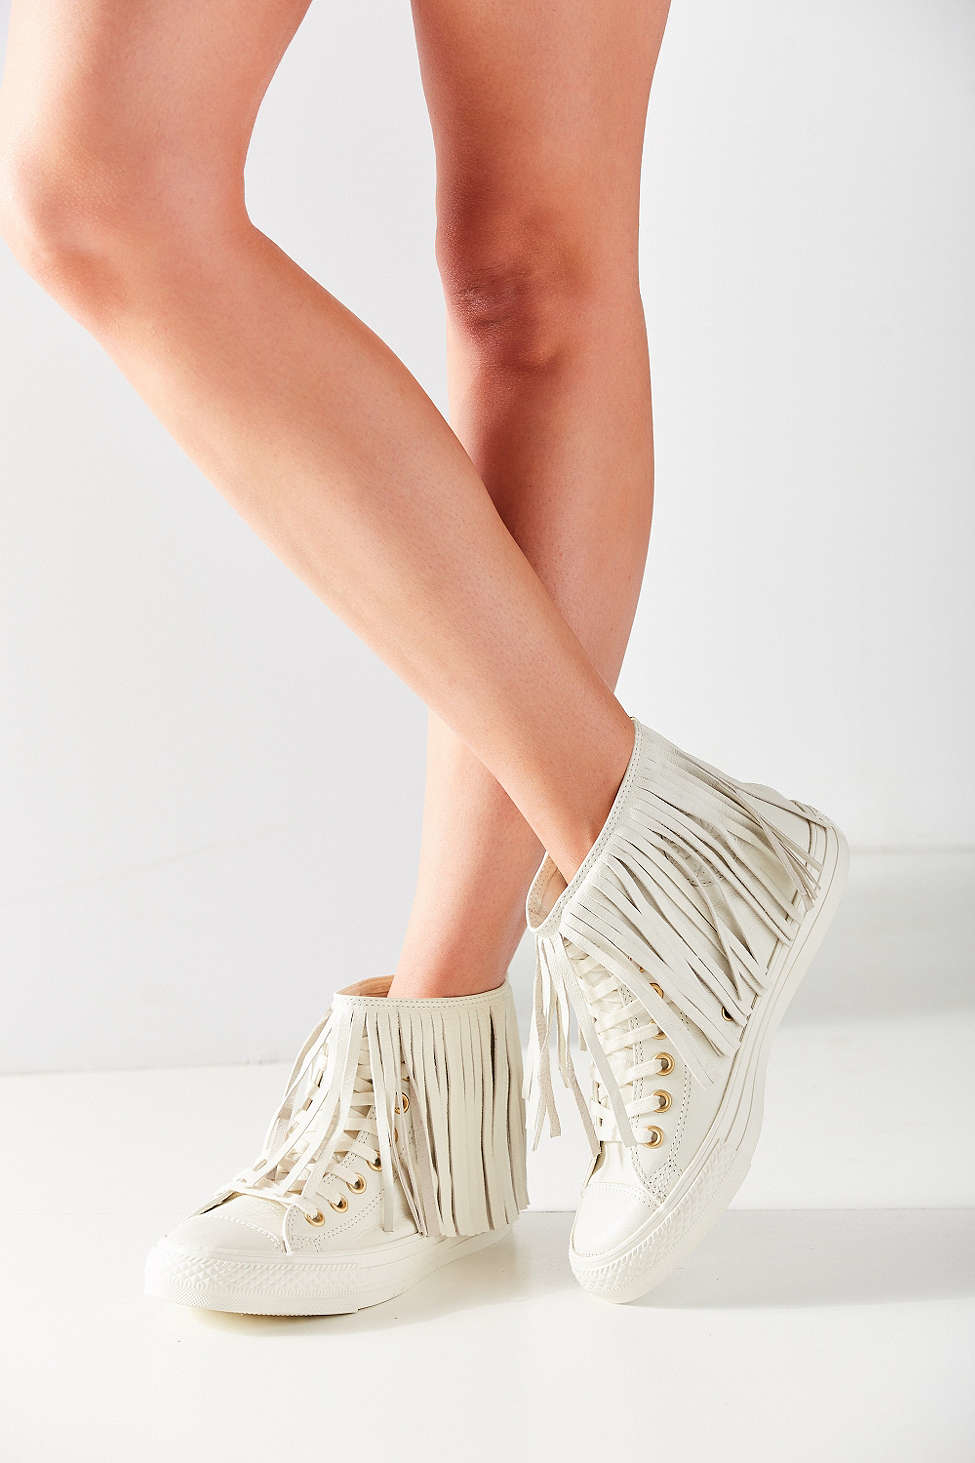 Converse Chuck Taylor All Star Fringe Sneaker in Natural | Lyst